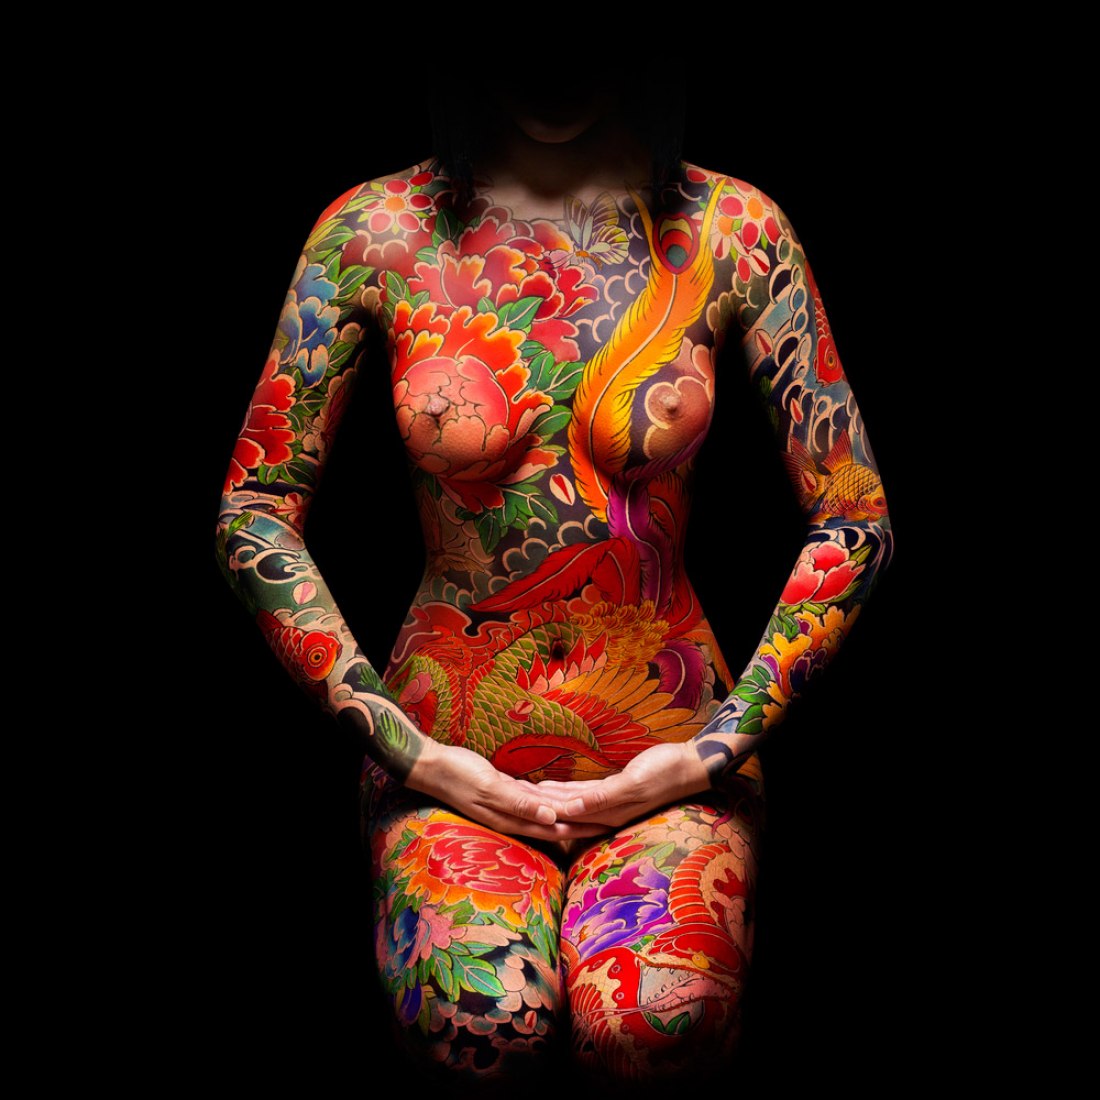 The artwork for Miss Kō's intricate and beautiful tattoos was created by Horikitsune (Alex Kofuu Reinke), the only European to have trained as an apprentice in the traditional Japanese art of Irezumi. He studied for more than 15 years in Japan under of the world-renowned Irezumi artist Horiyoshi III. Photography by celebrity and fashion photographer Uli Webber.